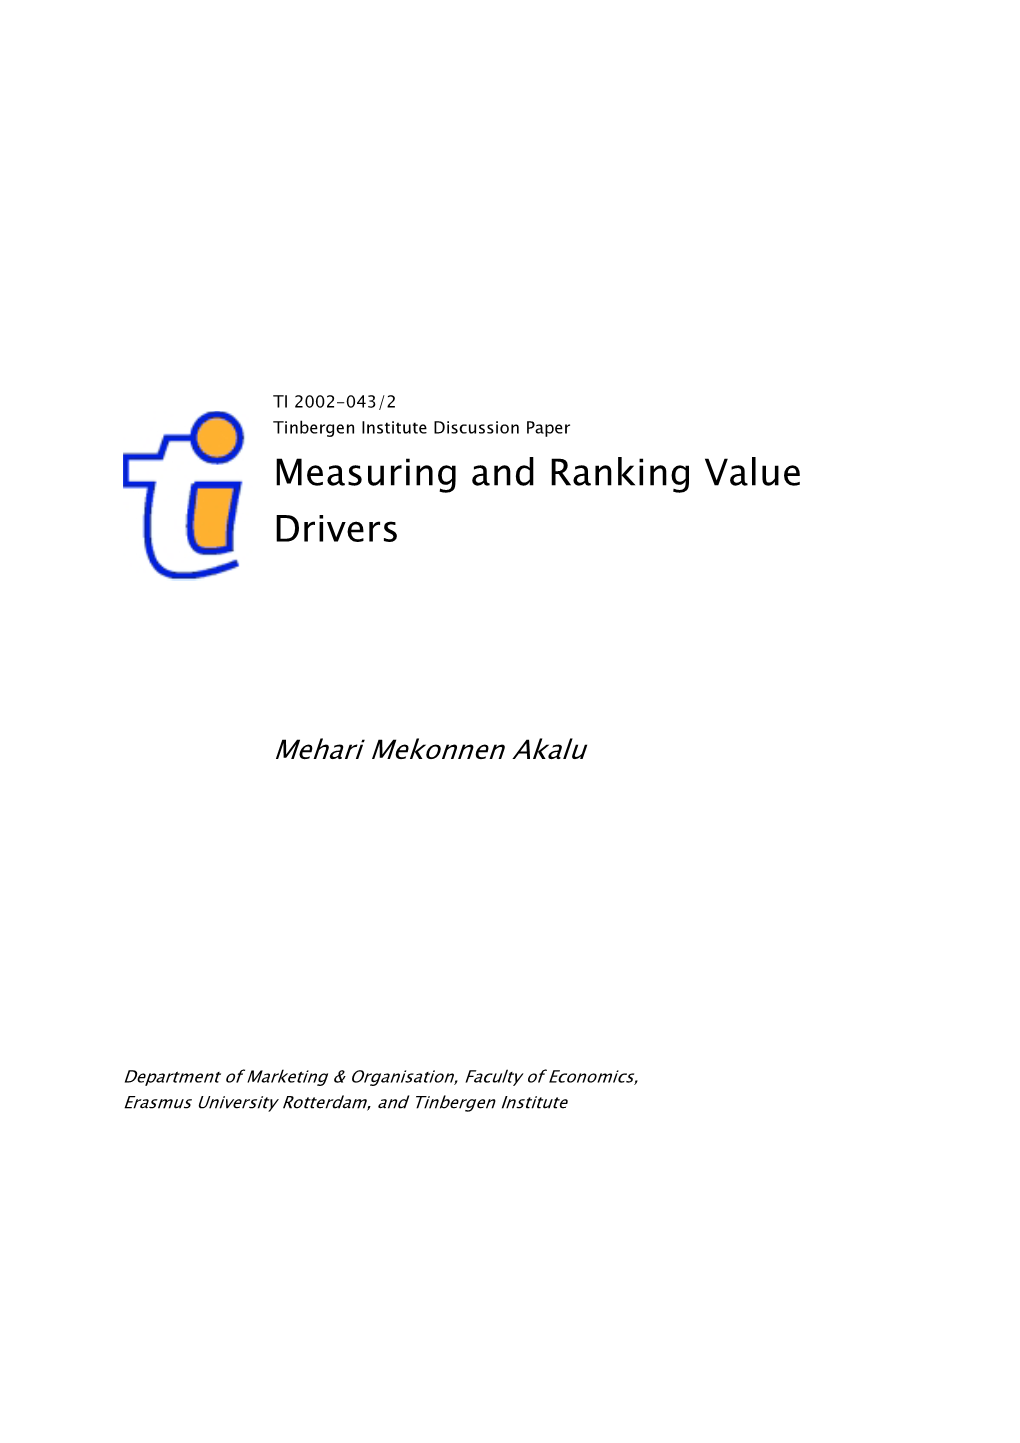 Measuring and Ranking Value Drivers: a Shareholder Value Perspective